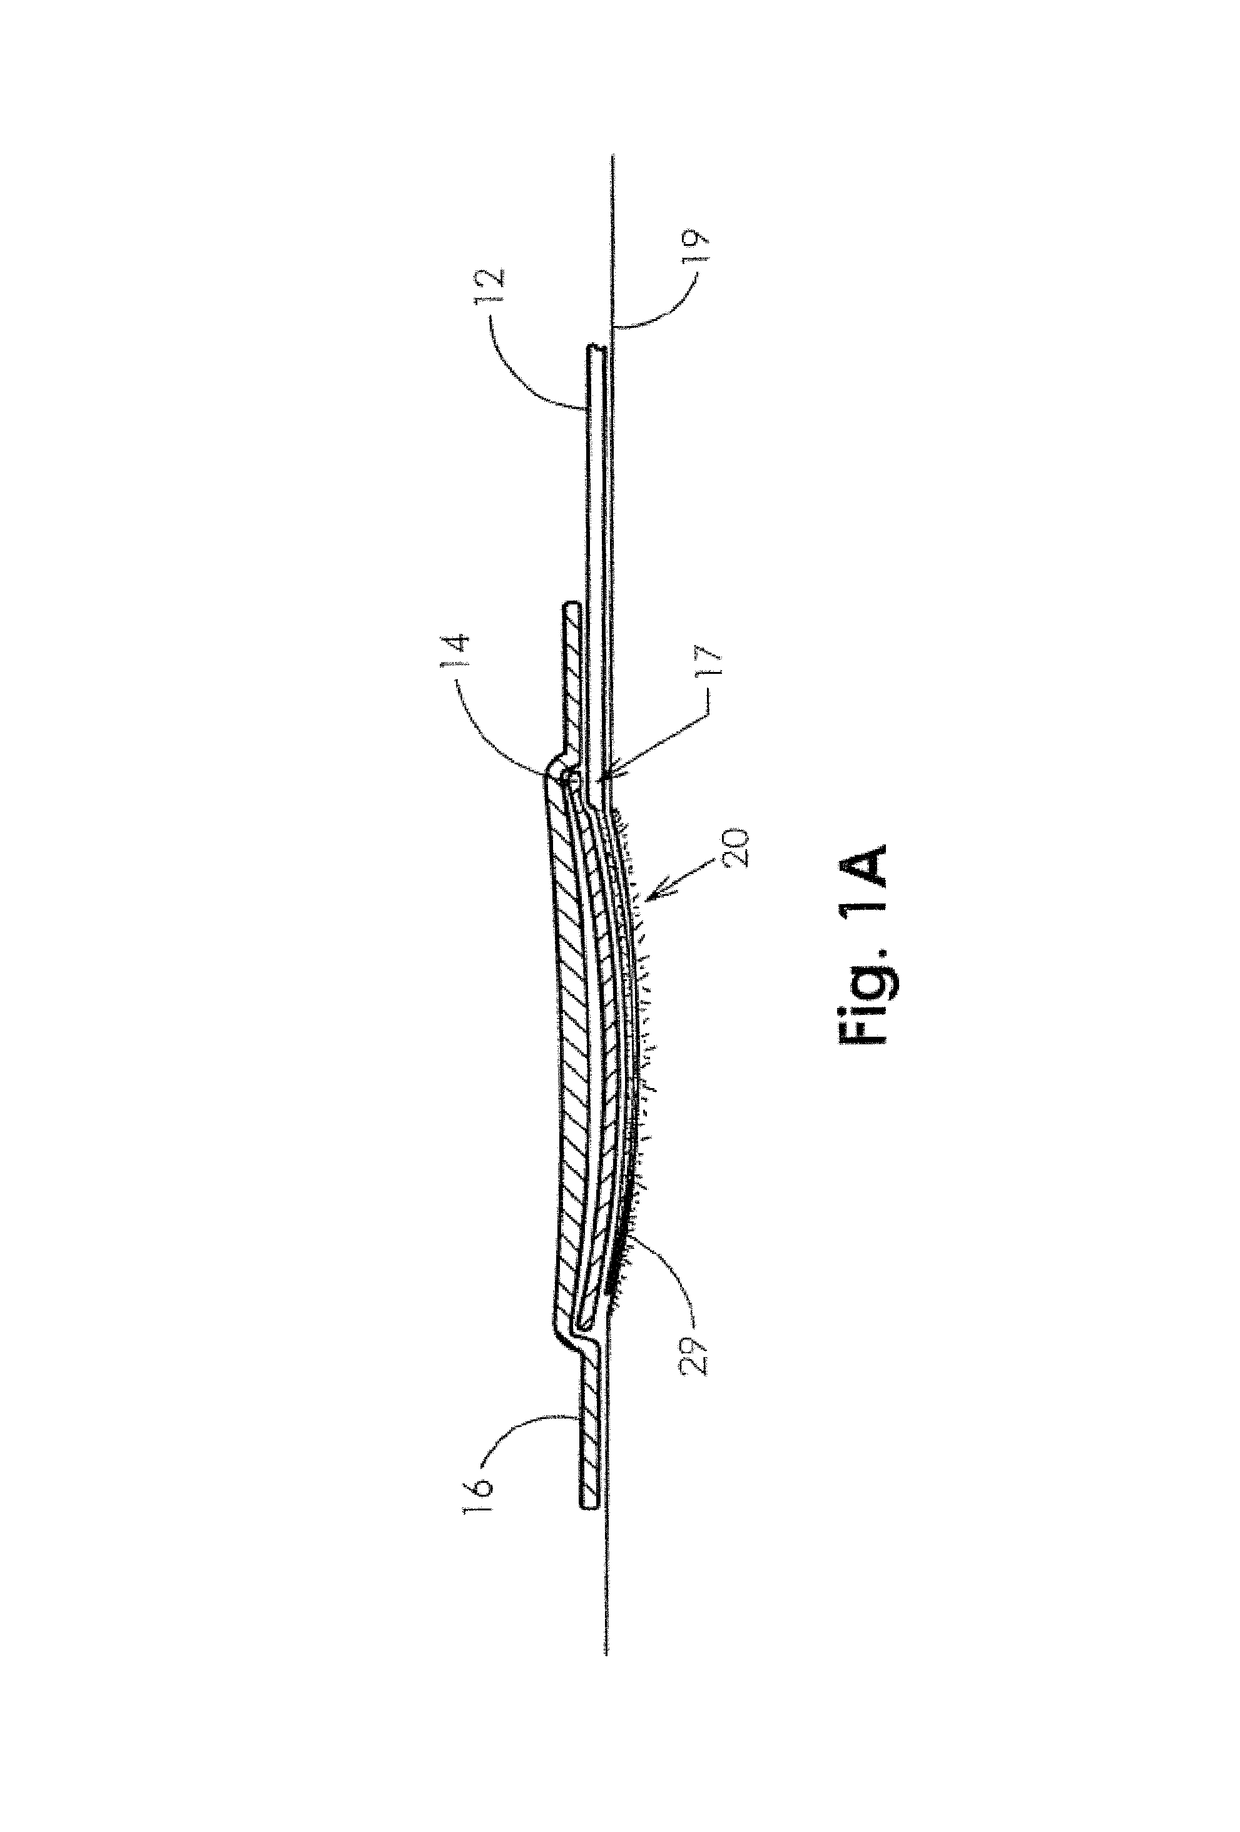 Apparatus and methods for controlling tissue oxygenation for wound healing and promoting tissue viability